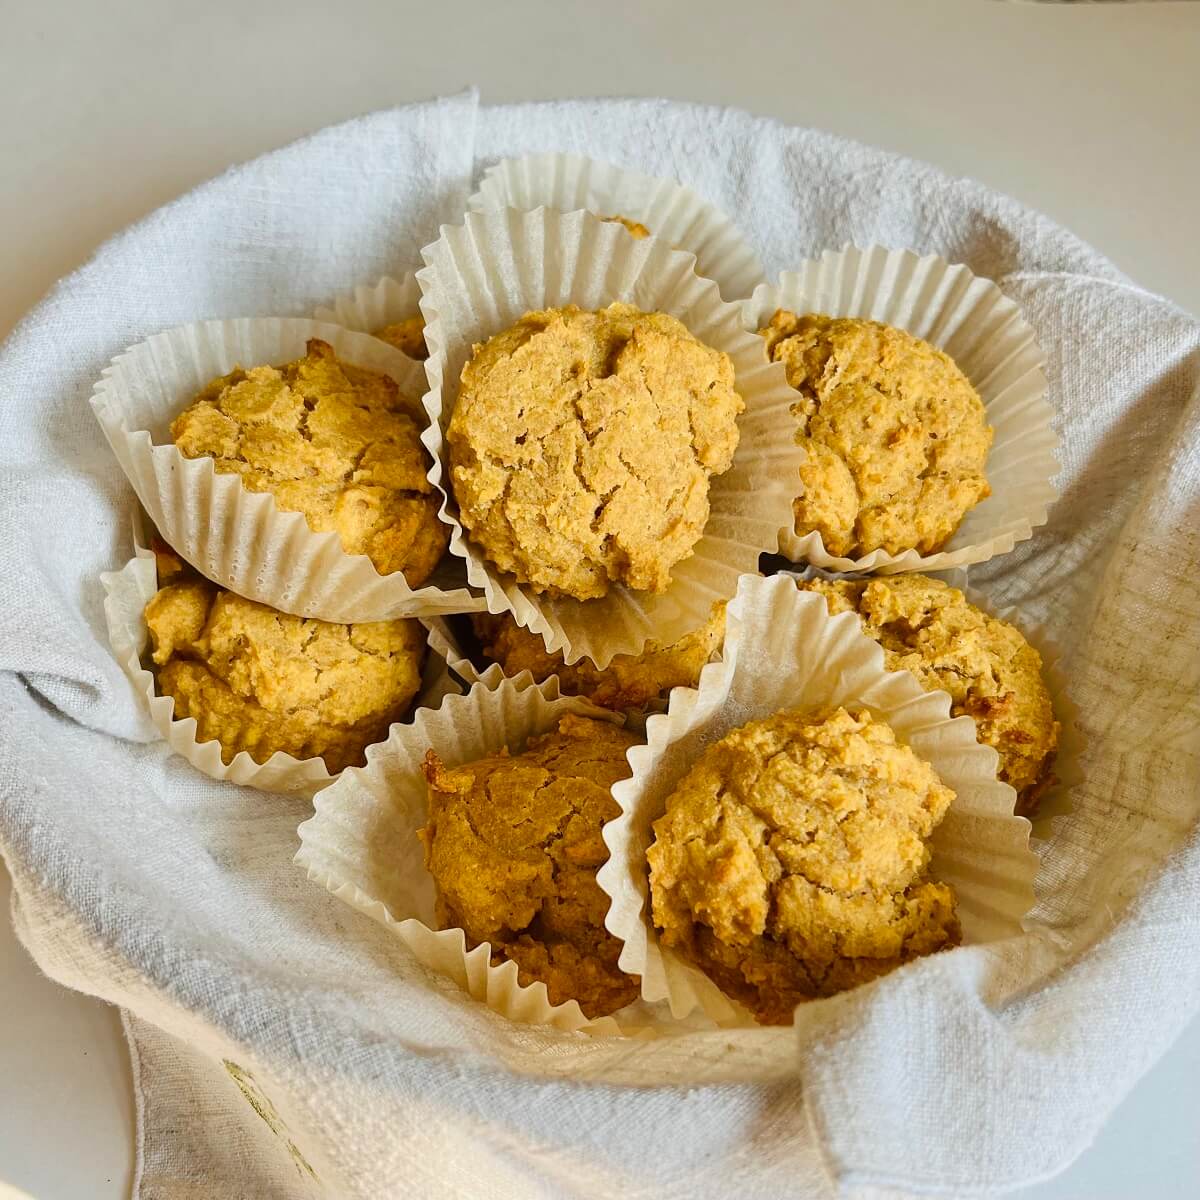 Corn flour muffins in a basket lined with a linen napkin.